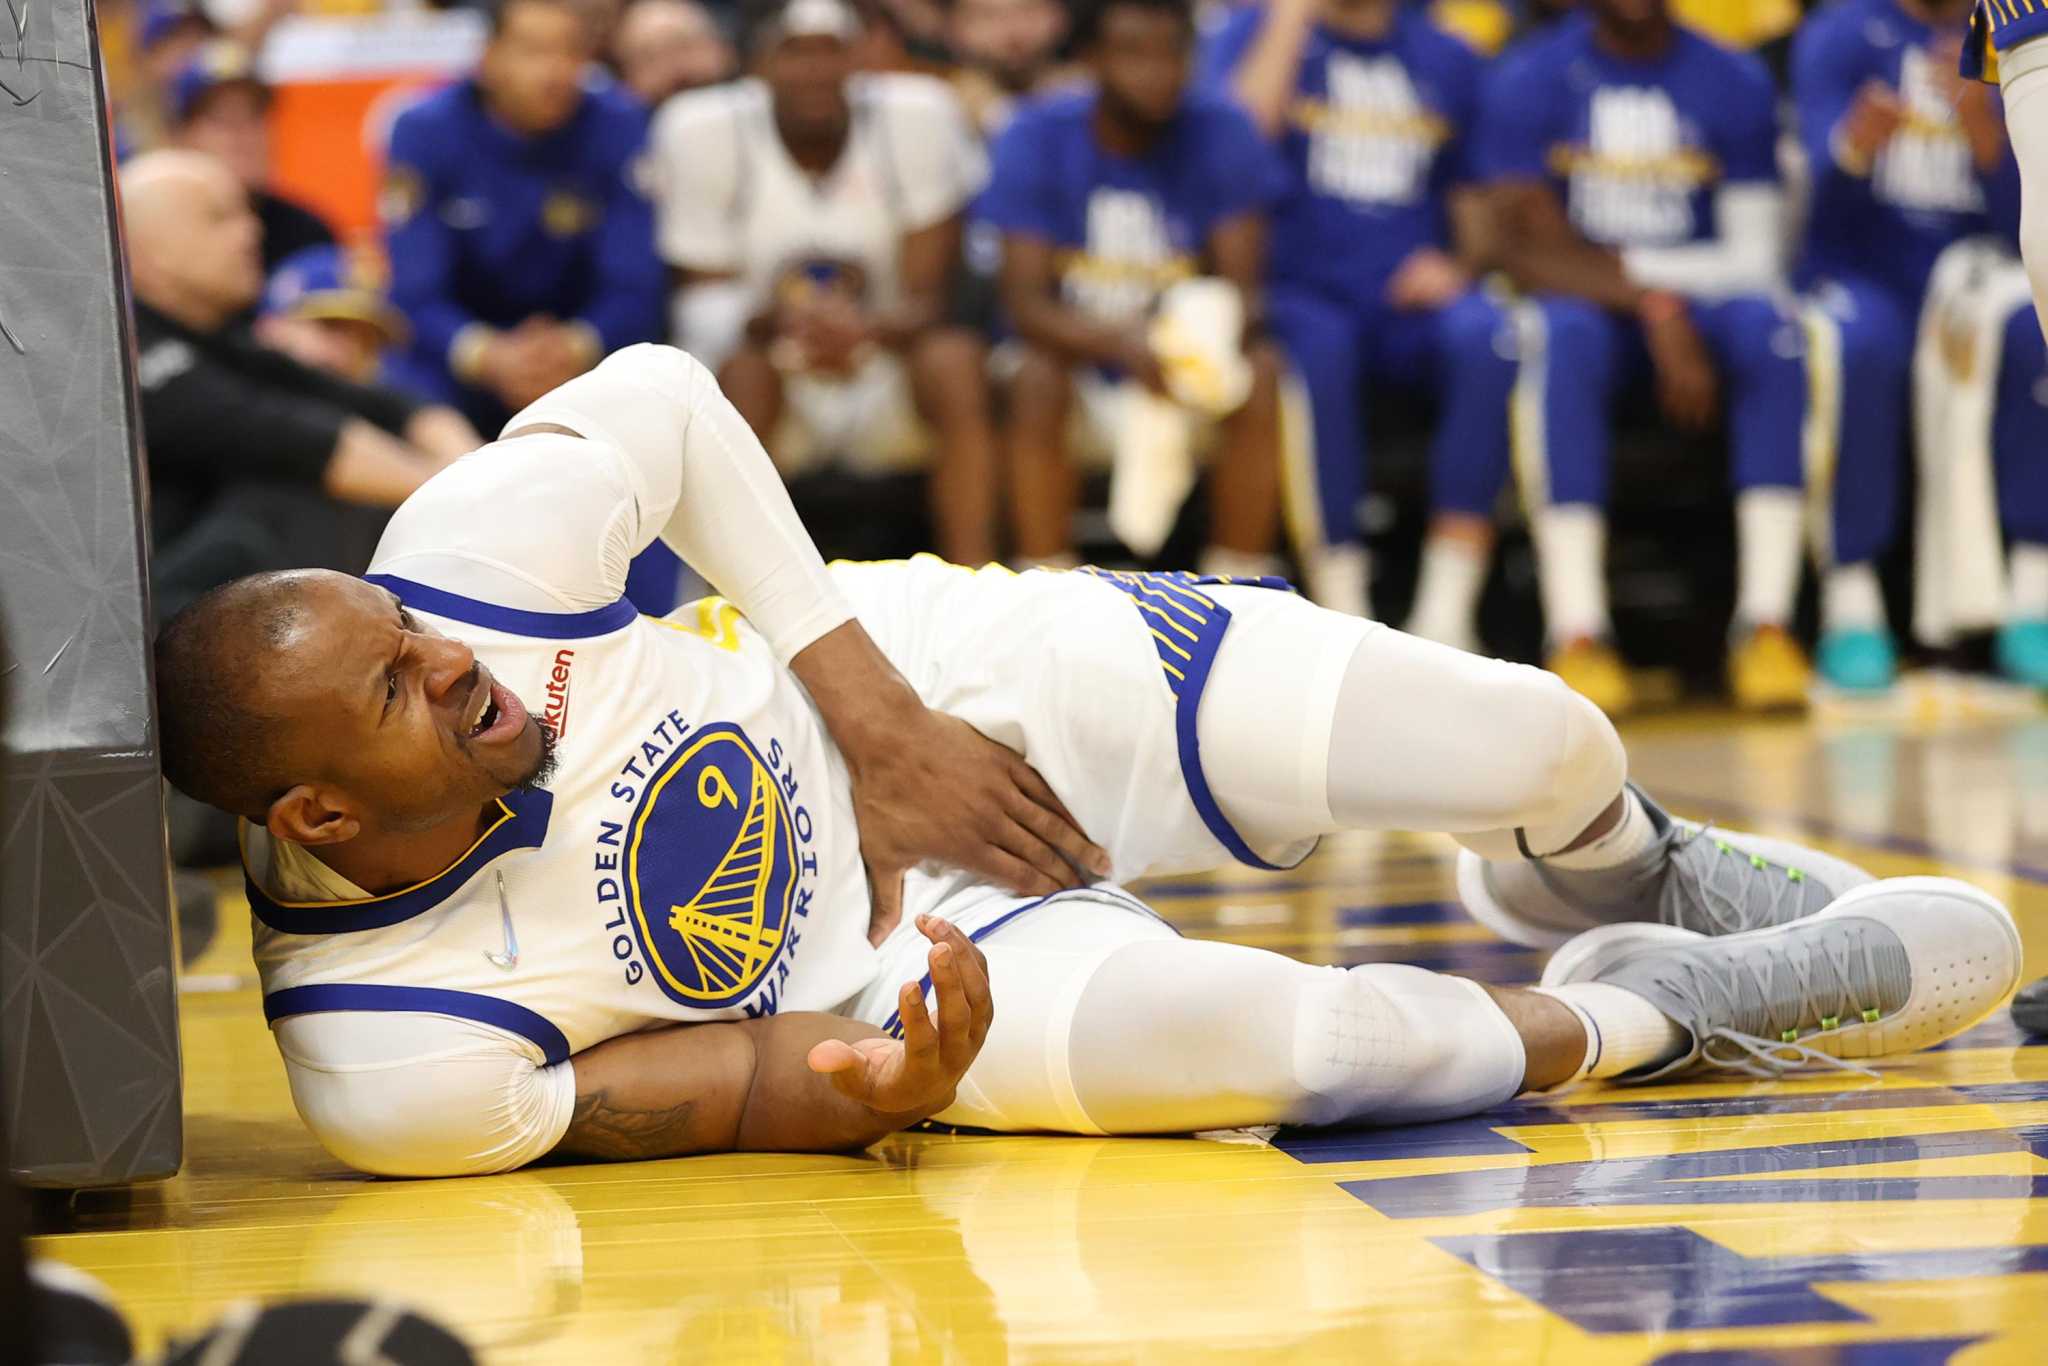 The Loss of Andre Iguodala is a Major Blow to the Warriors